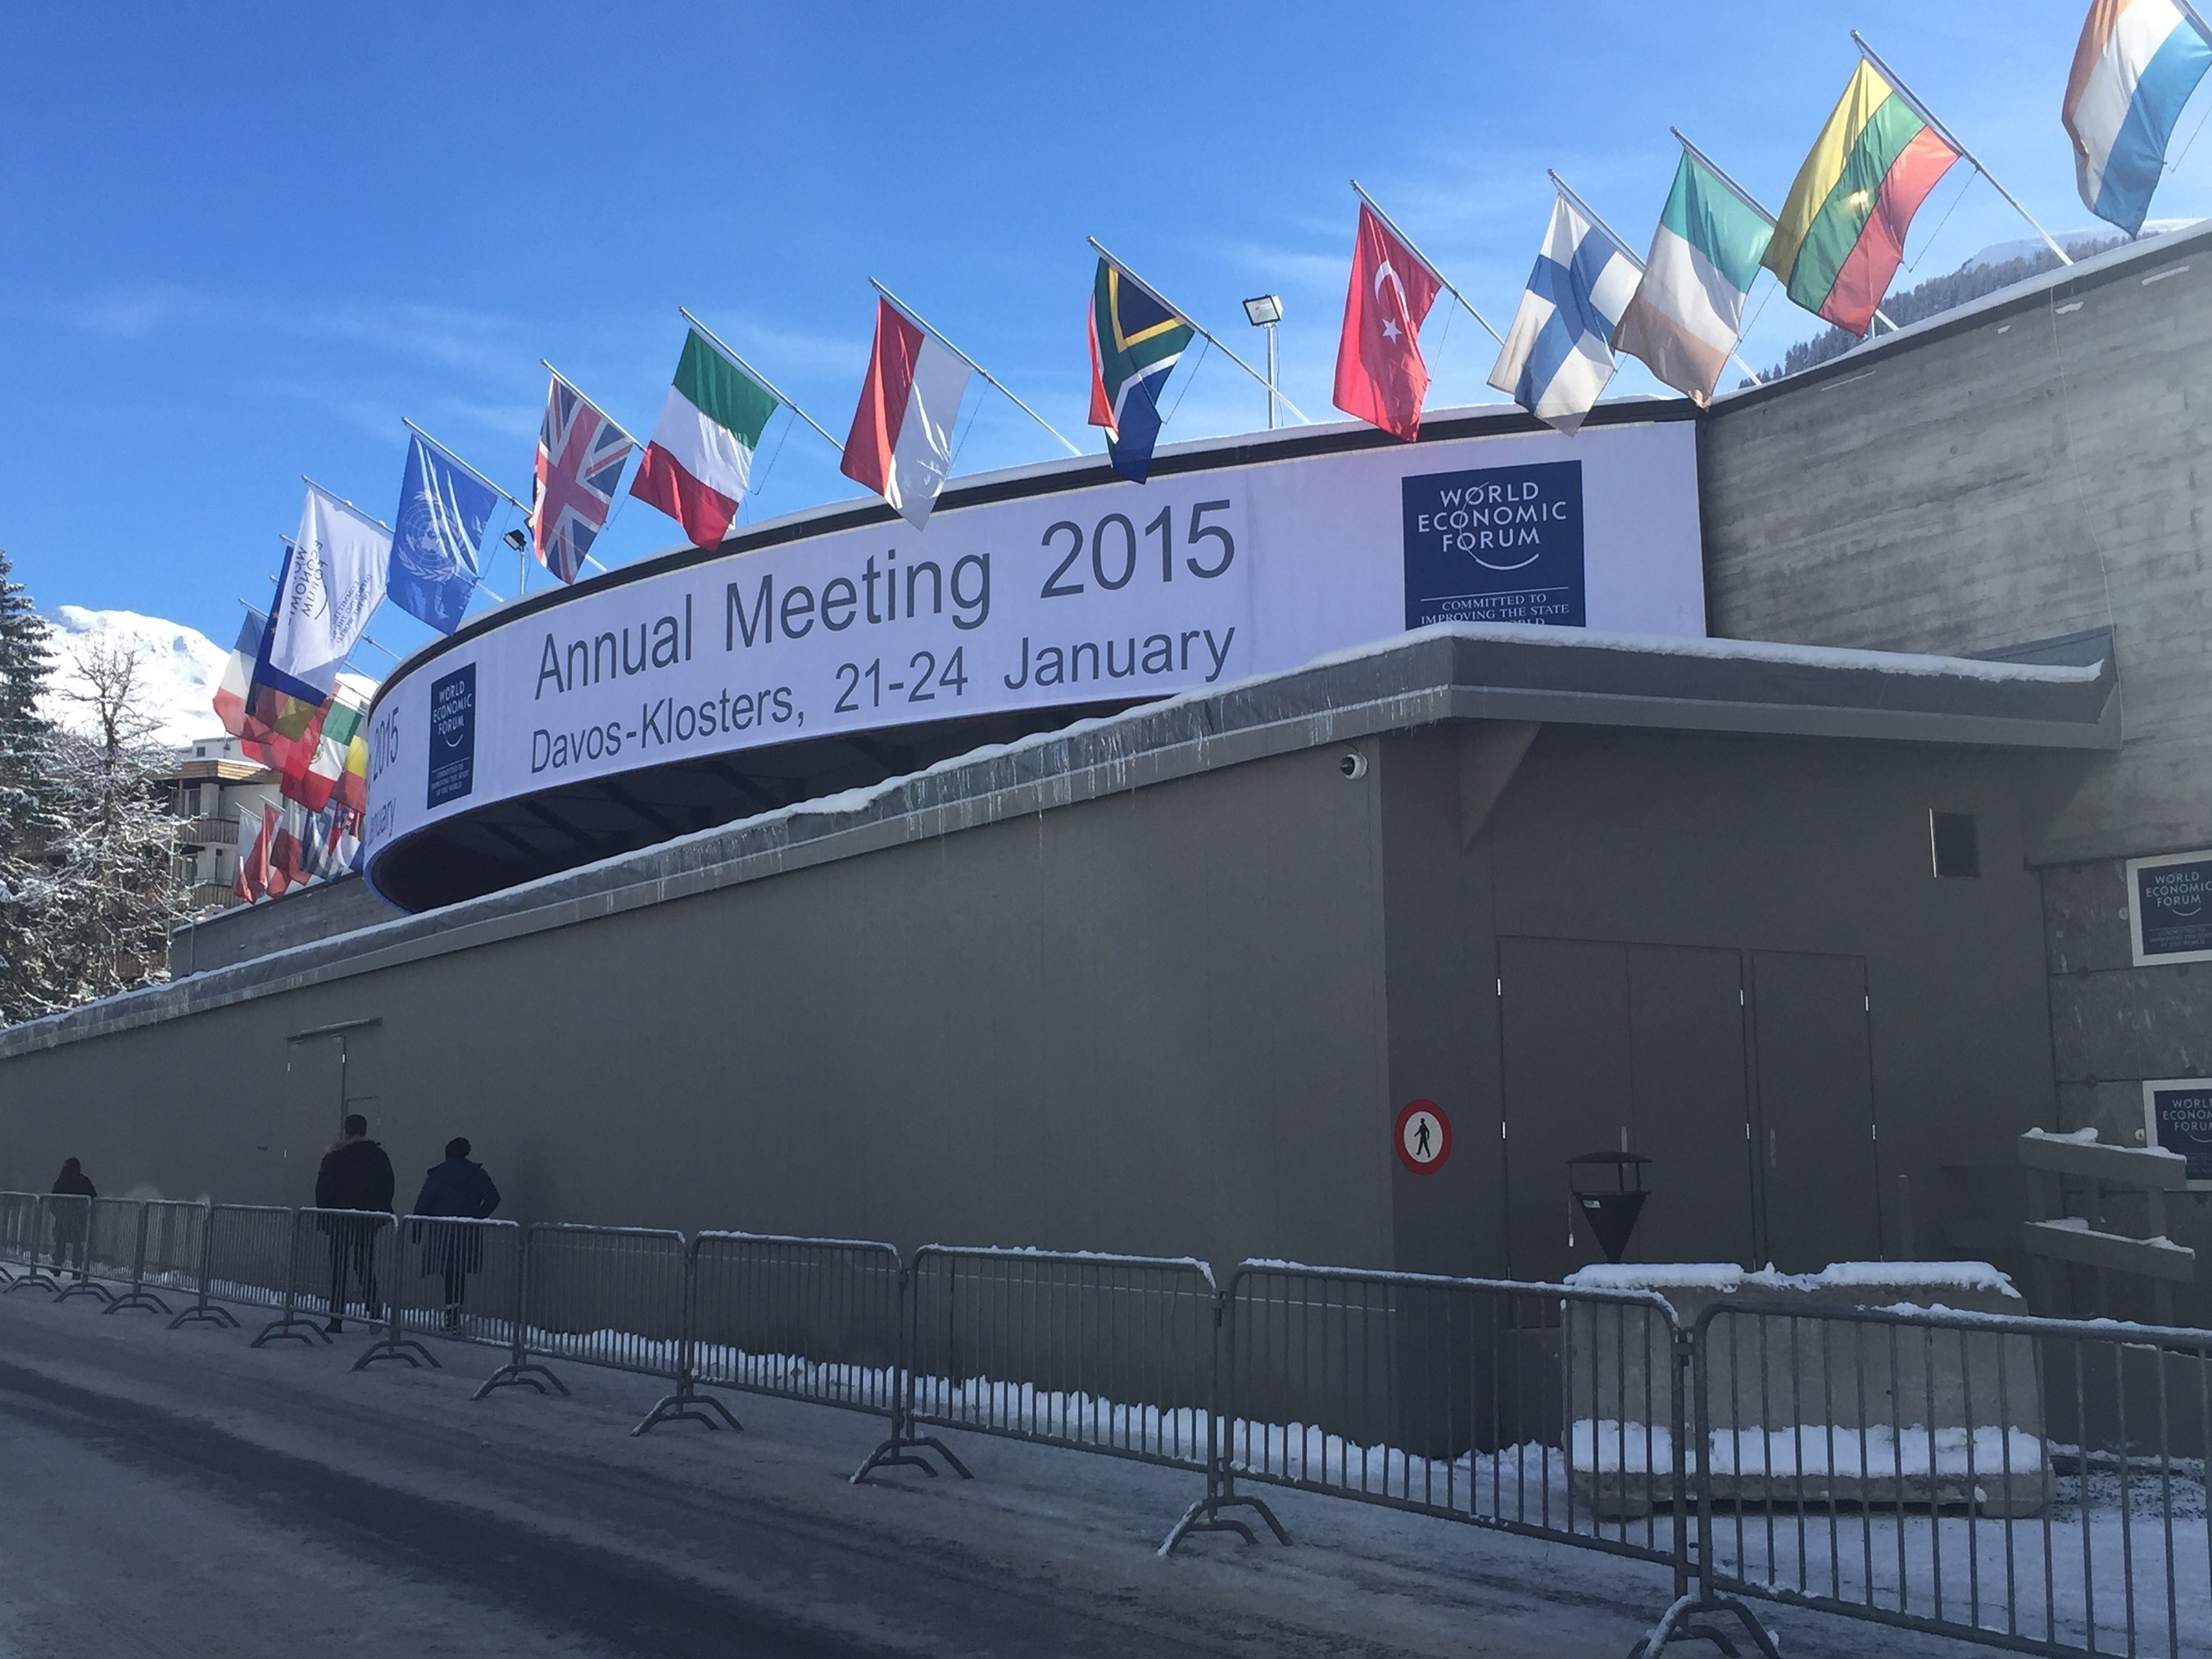 International Justice Mission (IJM) President and CEO Gary Haugen is attending meetings at the 2015 World Economic Forum in Davos, Switzerland to raise the justice agenda among participants.